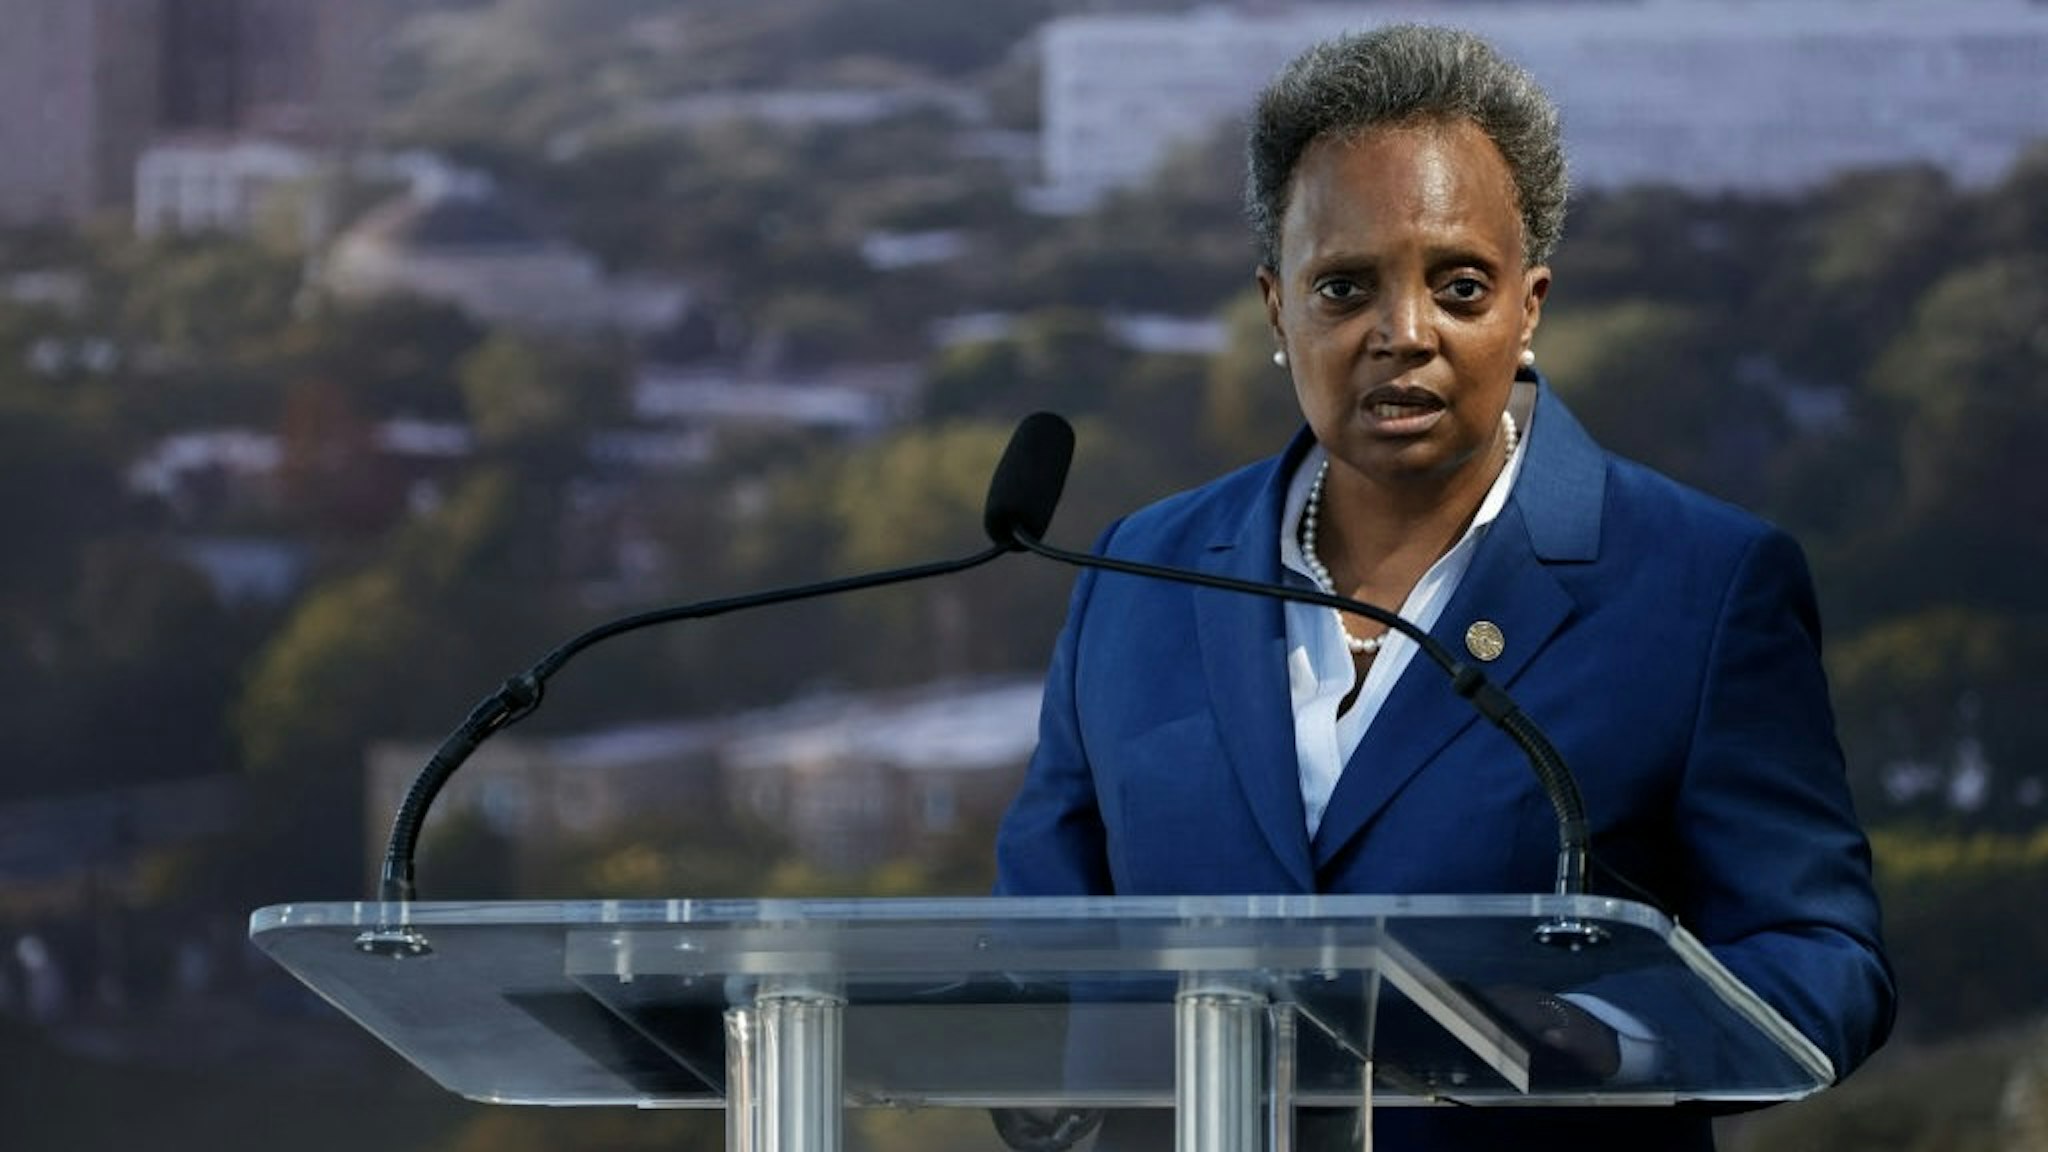 US-POLITICS-OBAMA-CENTER Chicago mayor Lori Lightfoot speaks during the groundbreaking ceremony for the Obama Presidential Center at Jackson Park on September 28, 2021 in Chicago, Illinois. - The 700-million-dollar project has been six years in the making and the center is scheduled to open in 2025. (Photo by Kamil Krzaczynski / AFP) (Photo by KAMIL KRZACZYNSKI/AFP via Getty Images) KAMIL KRZACZYNSKI / Contributor via Getty Images